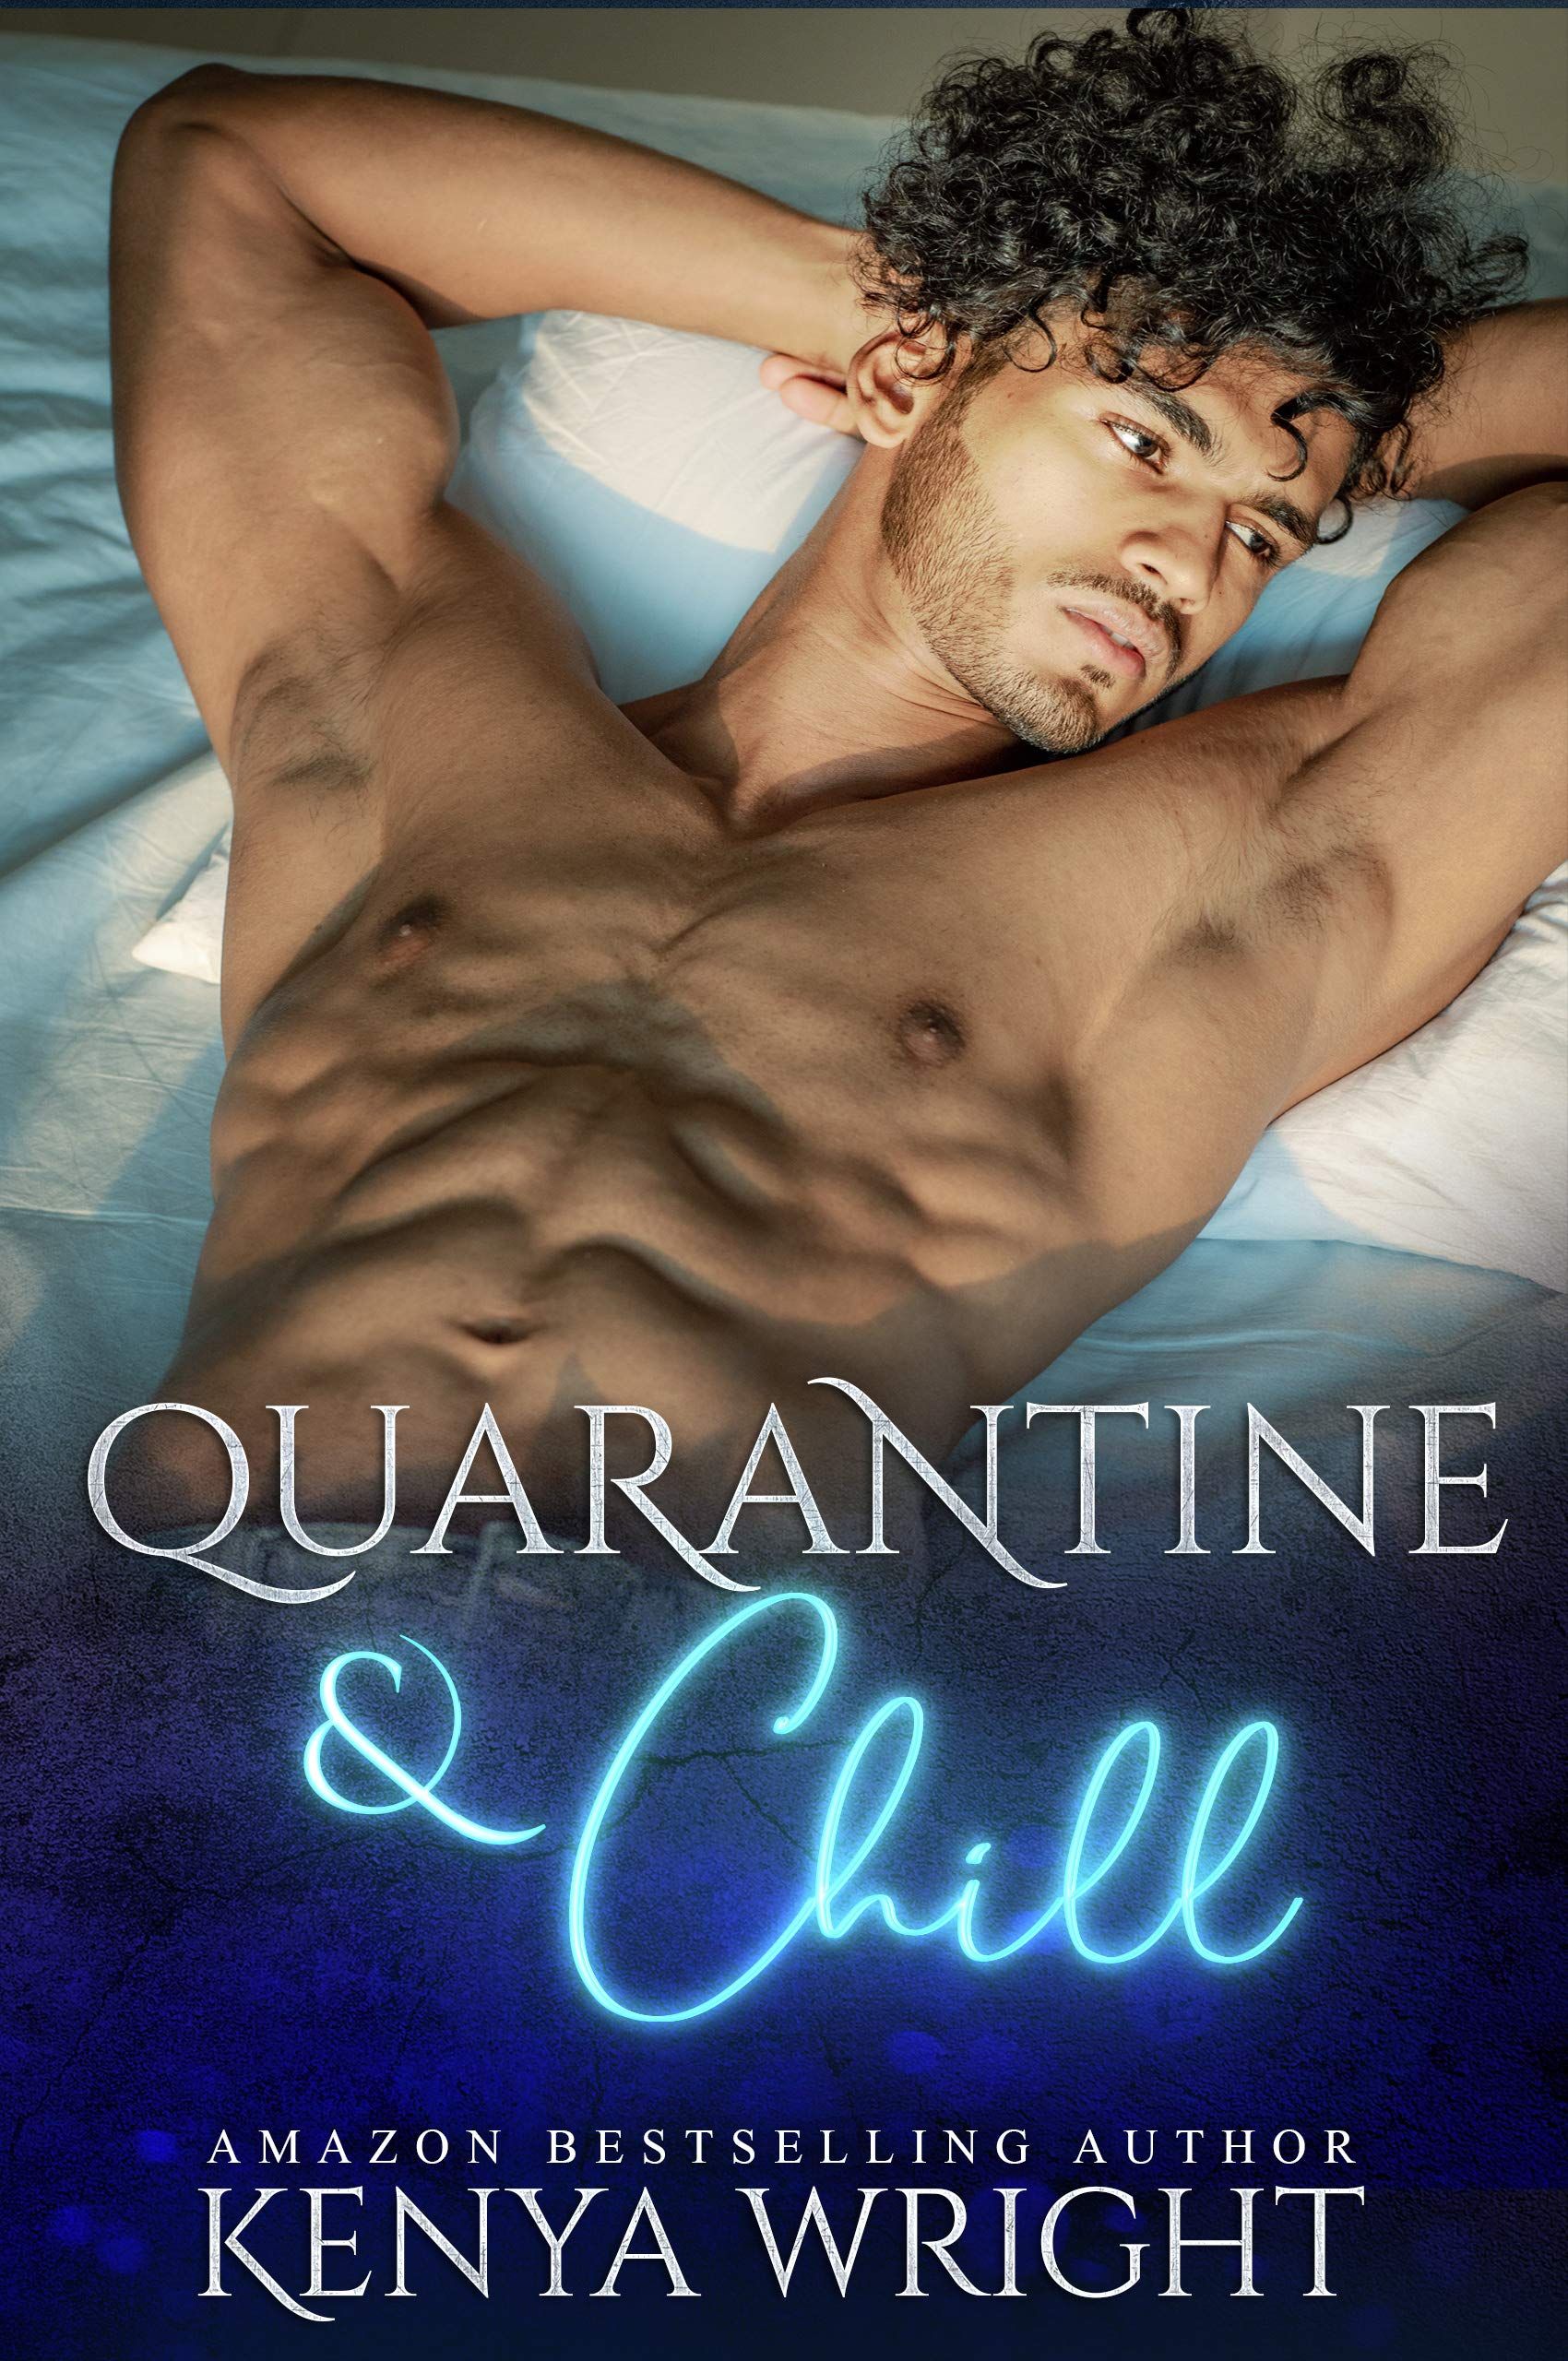 Quarantine and Chill by Kenya Wright cover